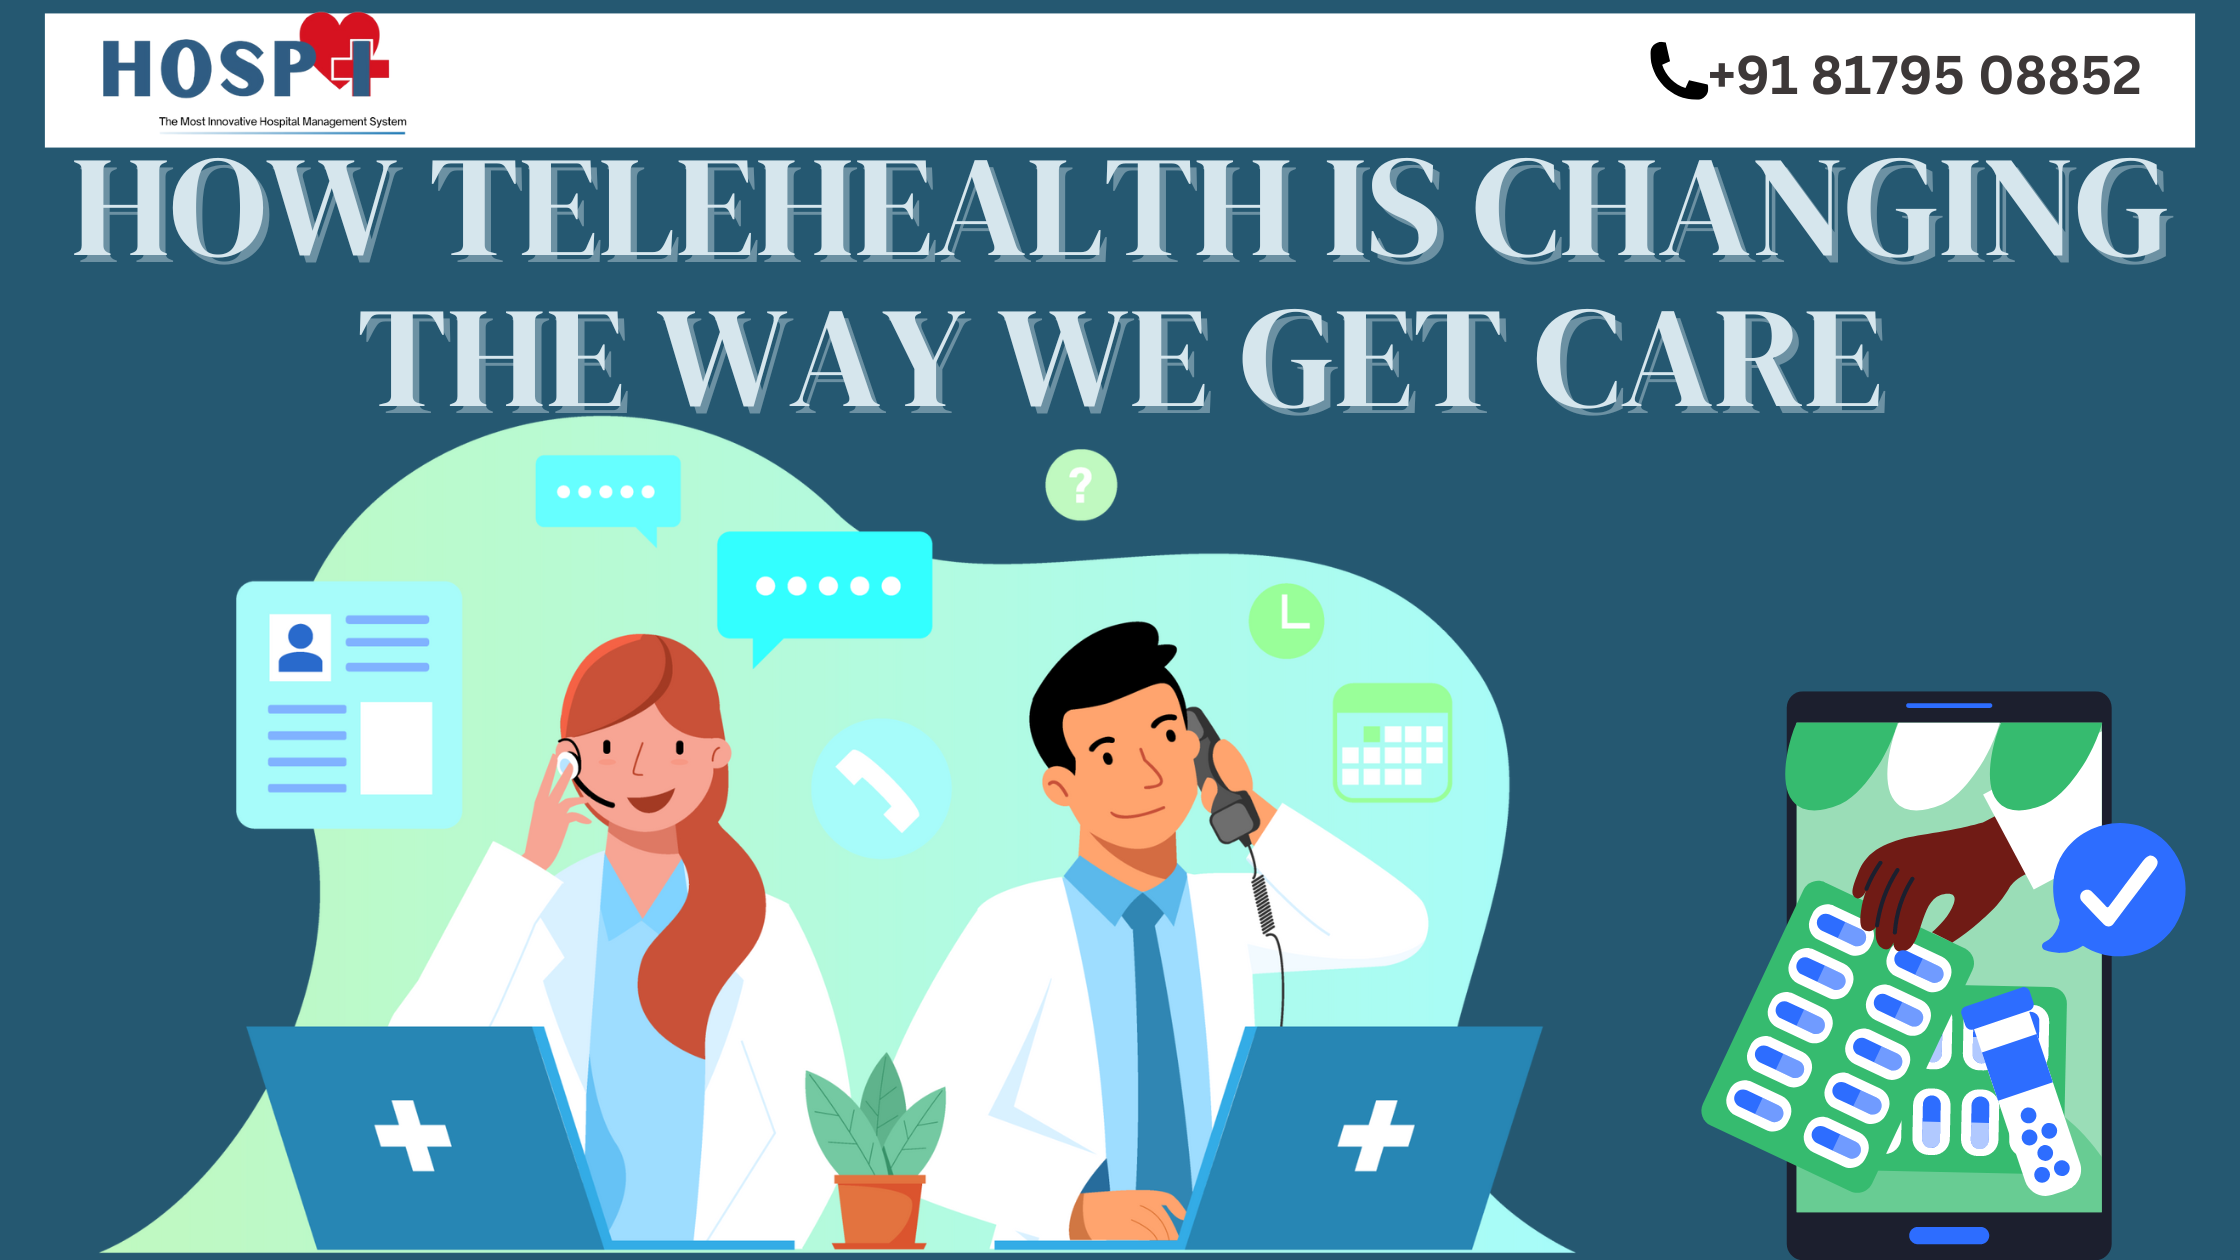 How Telehealth is Changing the Way We Get Care